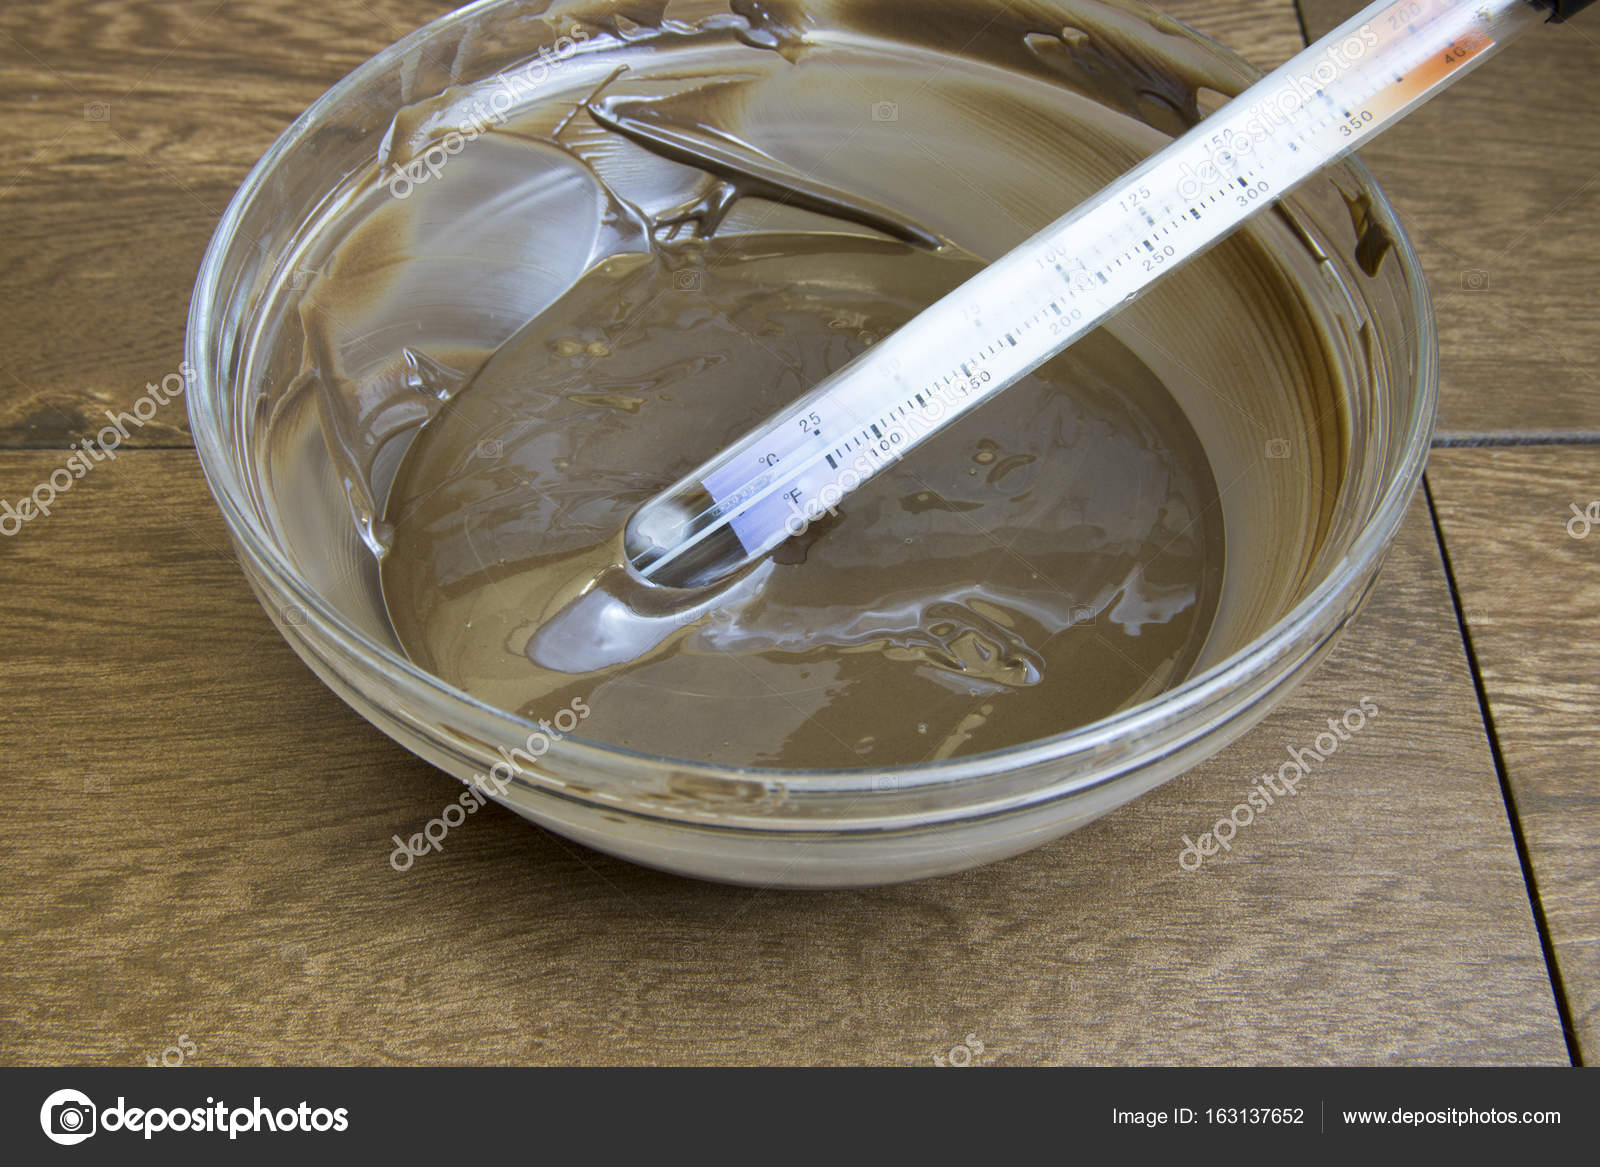 https://st3.depositphotos.com/3602679/16313/i/1600/depositphotos_163137652-stock-photo-candy-thermometer-in-bowl-of.jpg